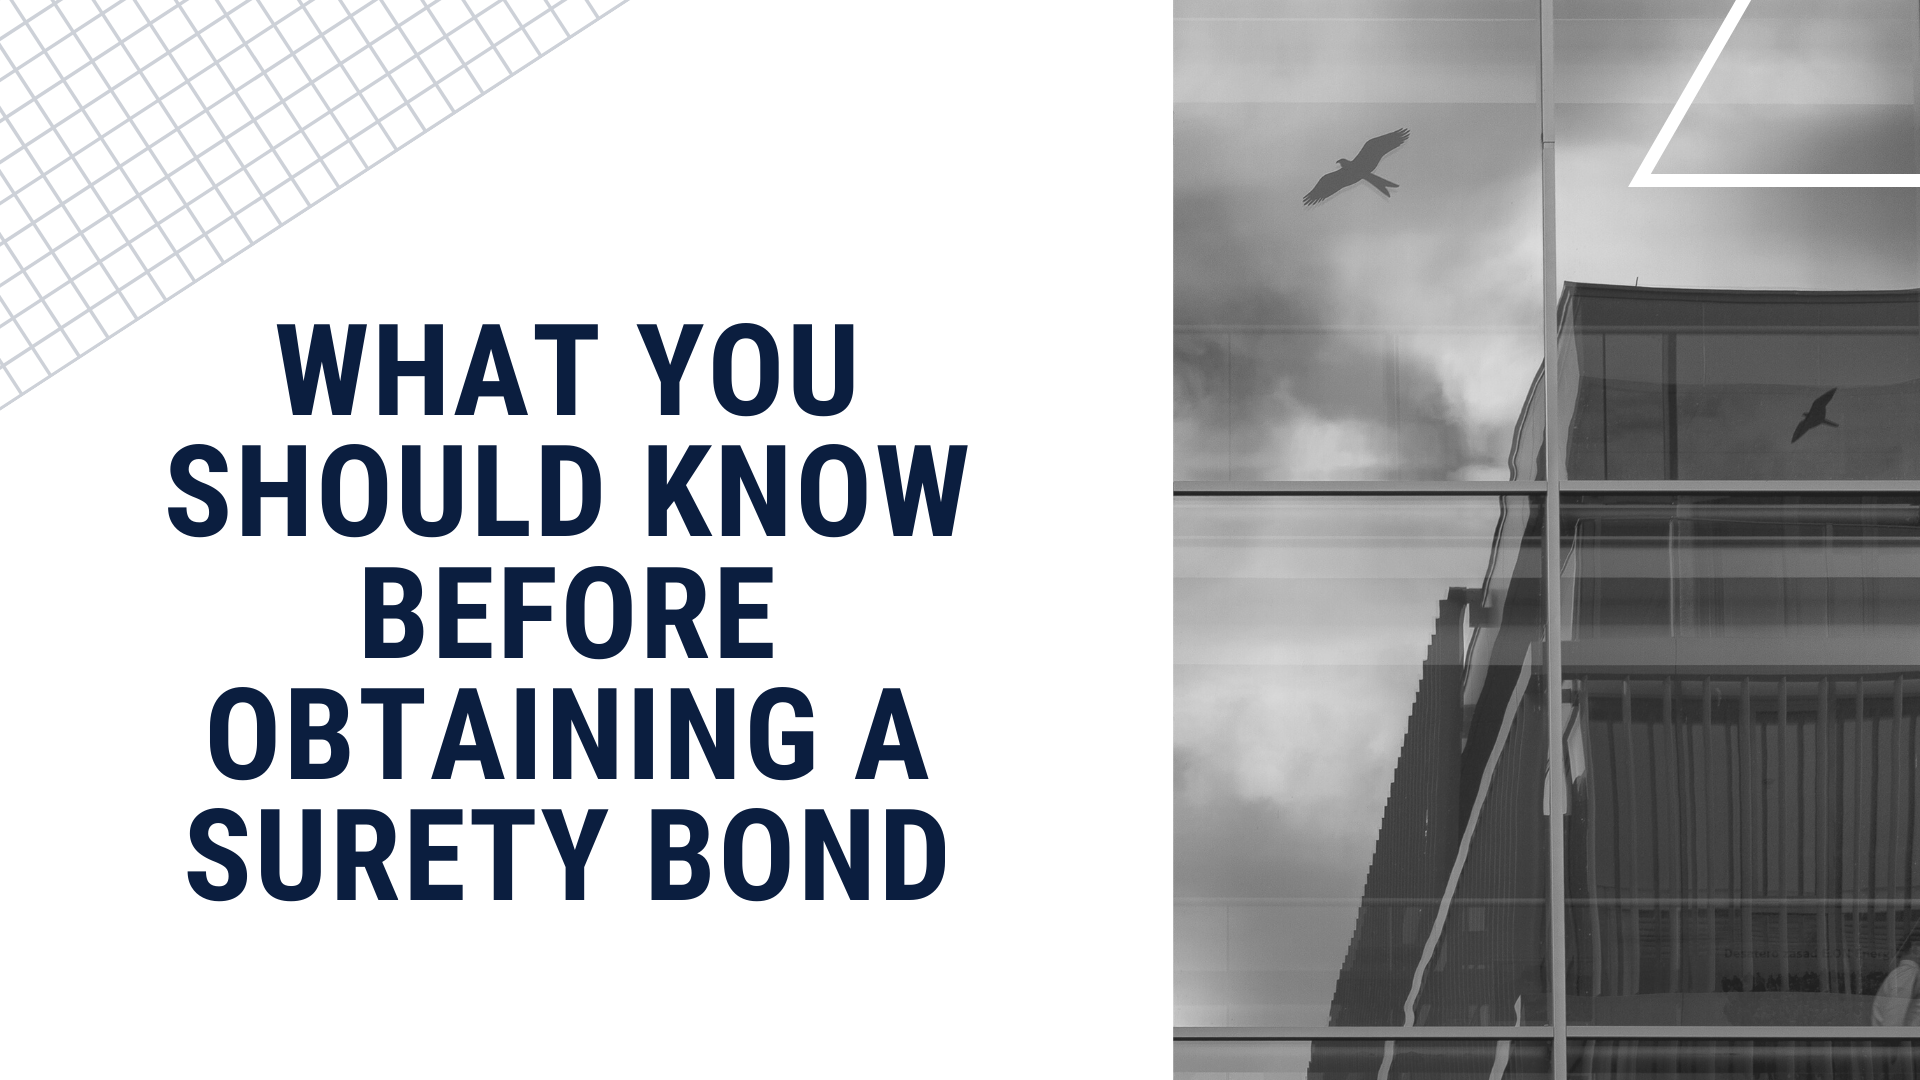 surety bond - To secure a surety bond, what credit score do you need - sky in black and white